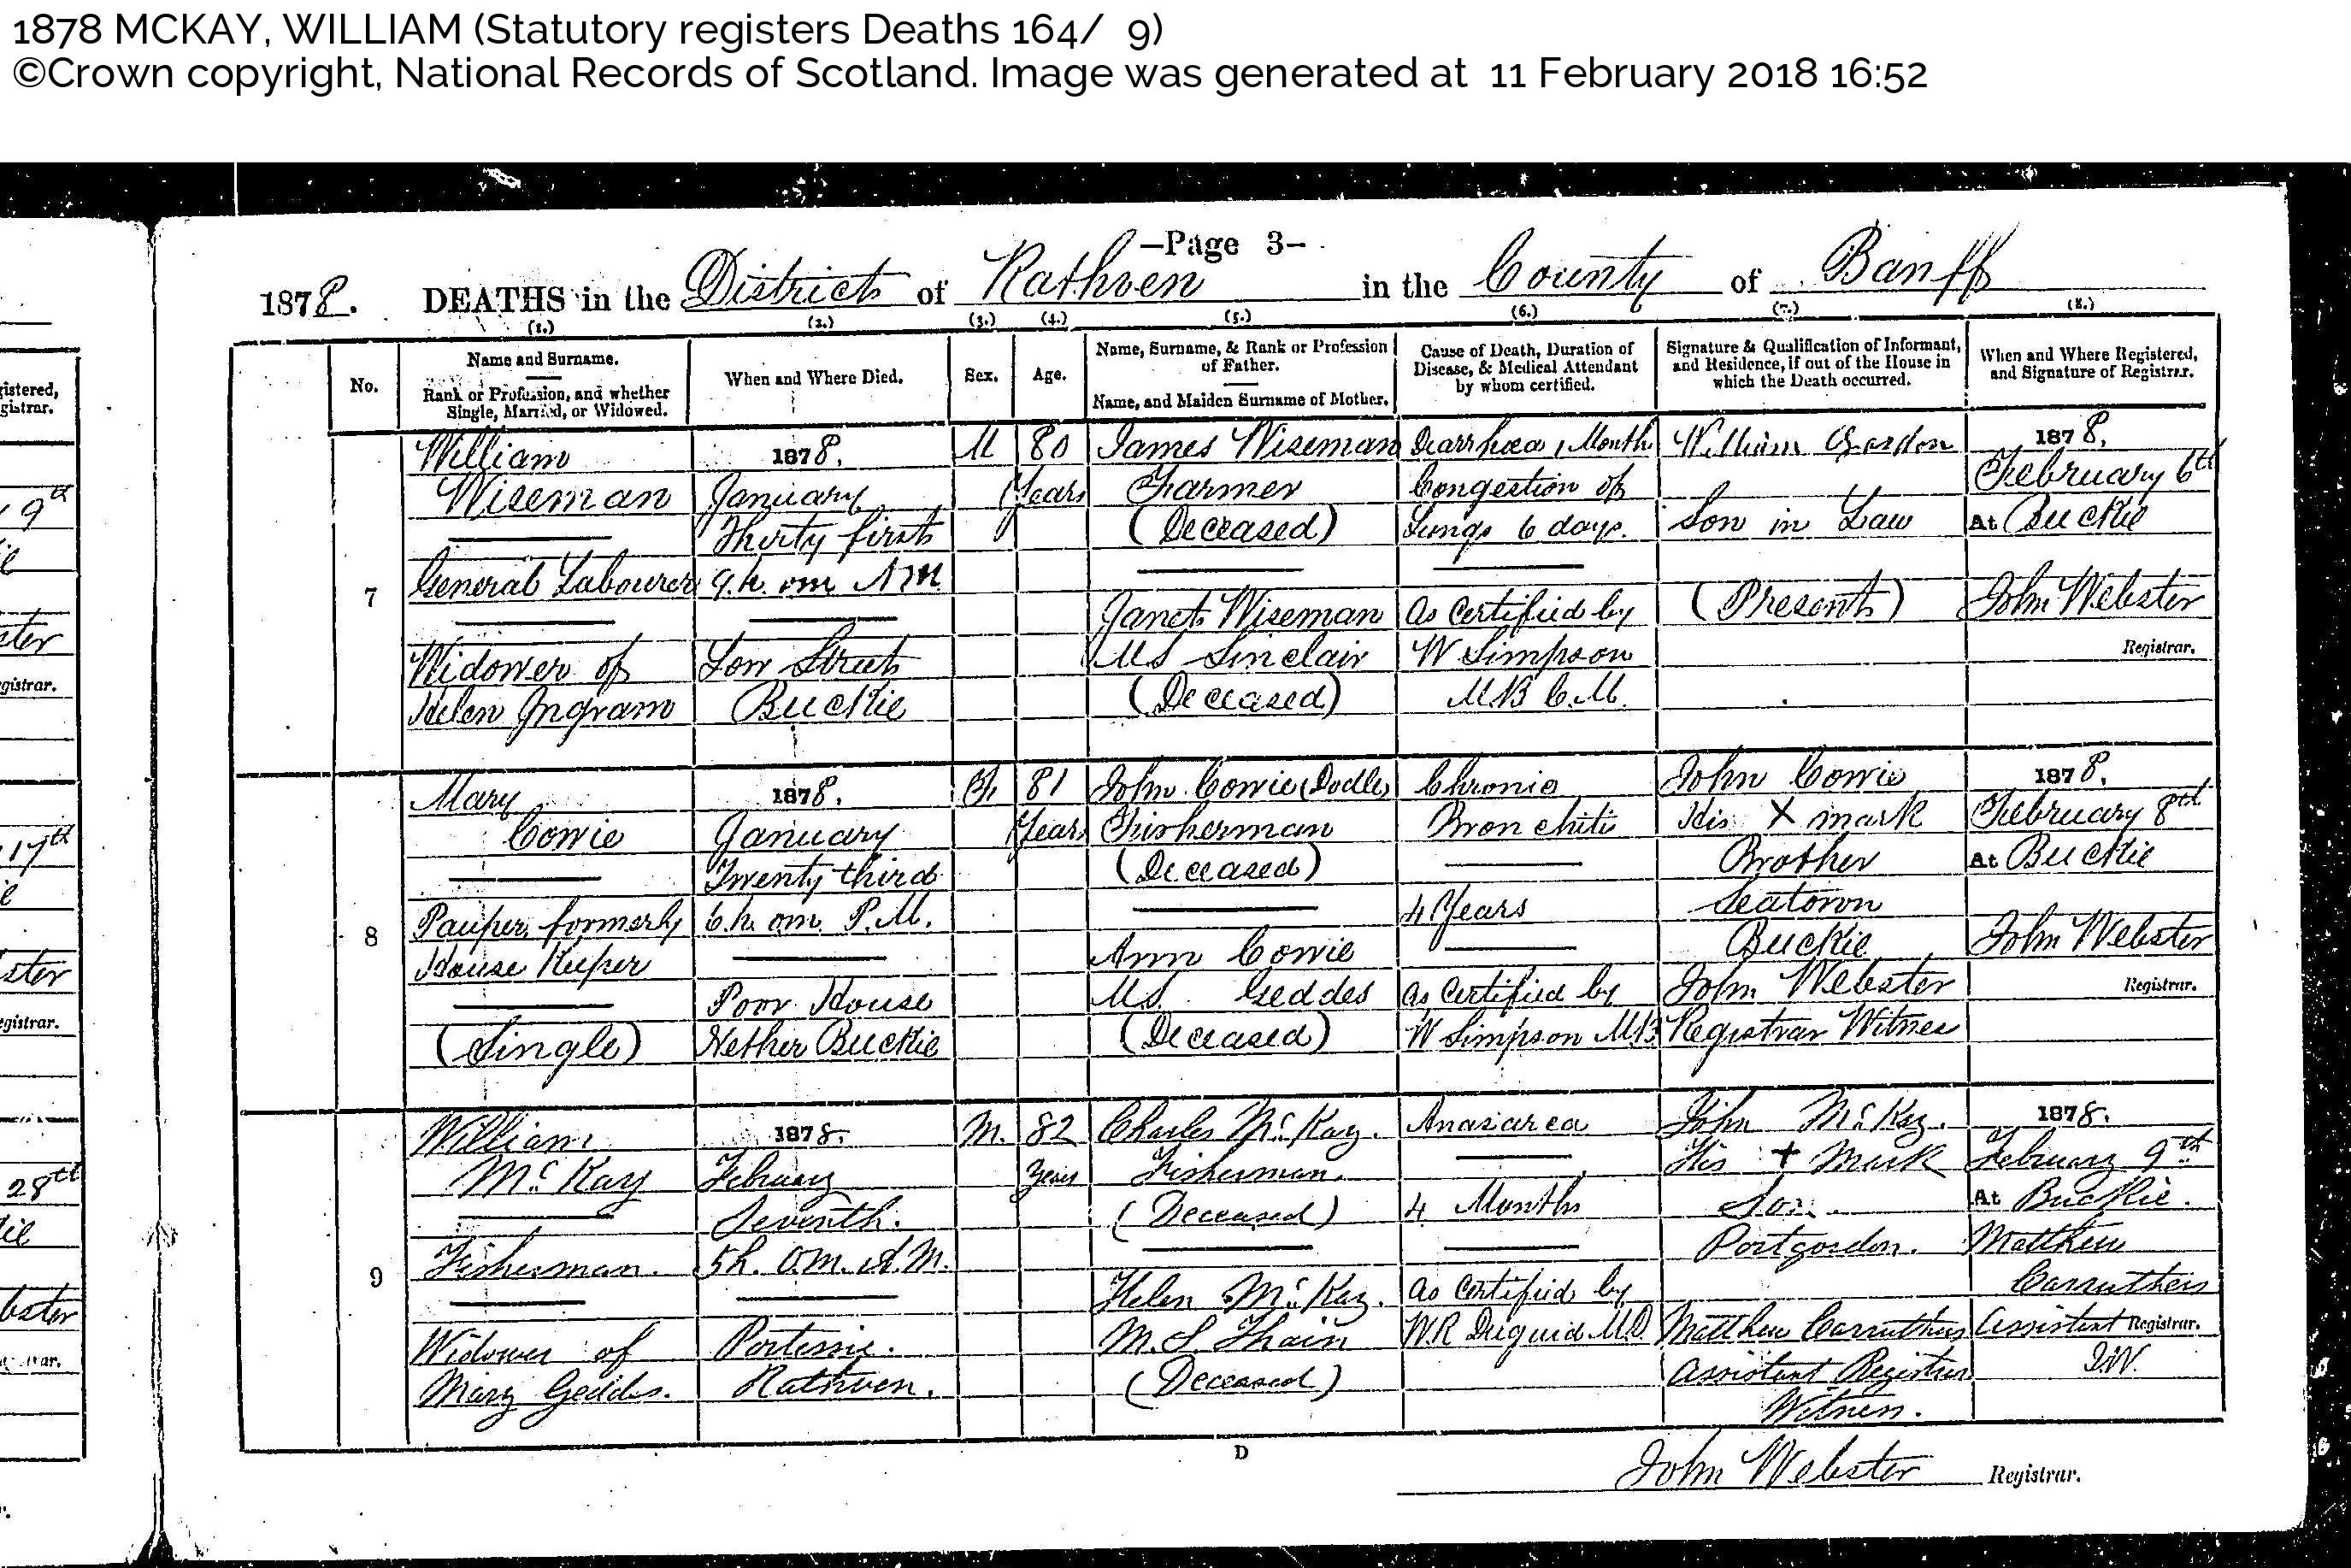 WilliamMcKay_D1878 Portessie, February 17, 1878, Linked To: <a href='i4098.html' >John McKay</a> and <a href='i4080.html' >Mary Geddes</a> and <a href='i295.html' >Helen Thain</a> and <a href='i259.html' >William McKay</a> and <a href='i197.html' >Charles McKay °</a>